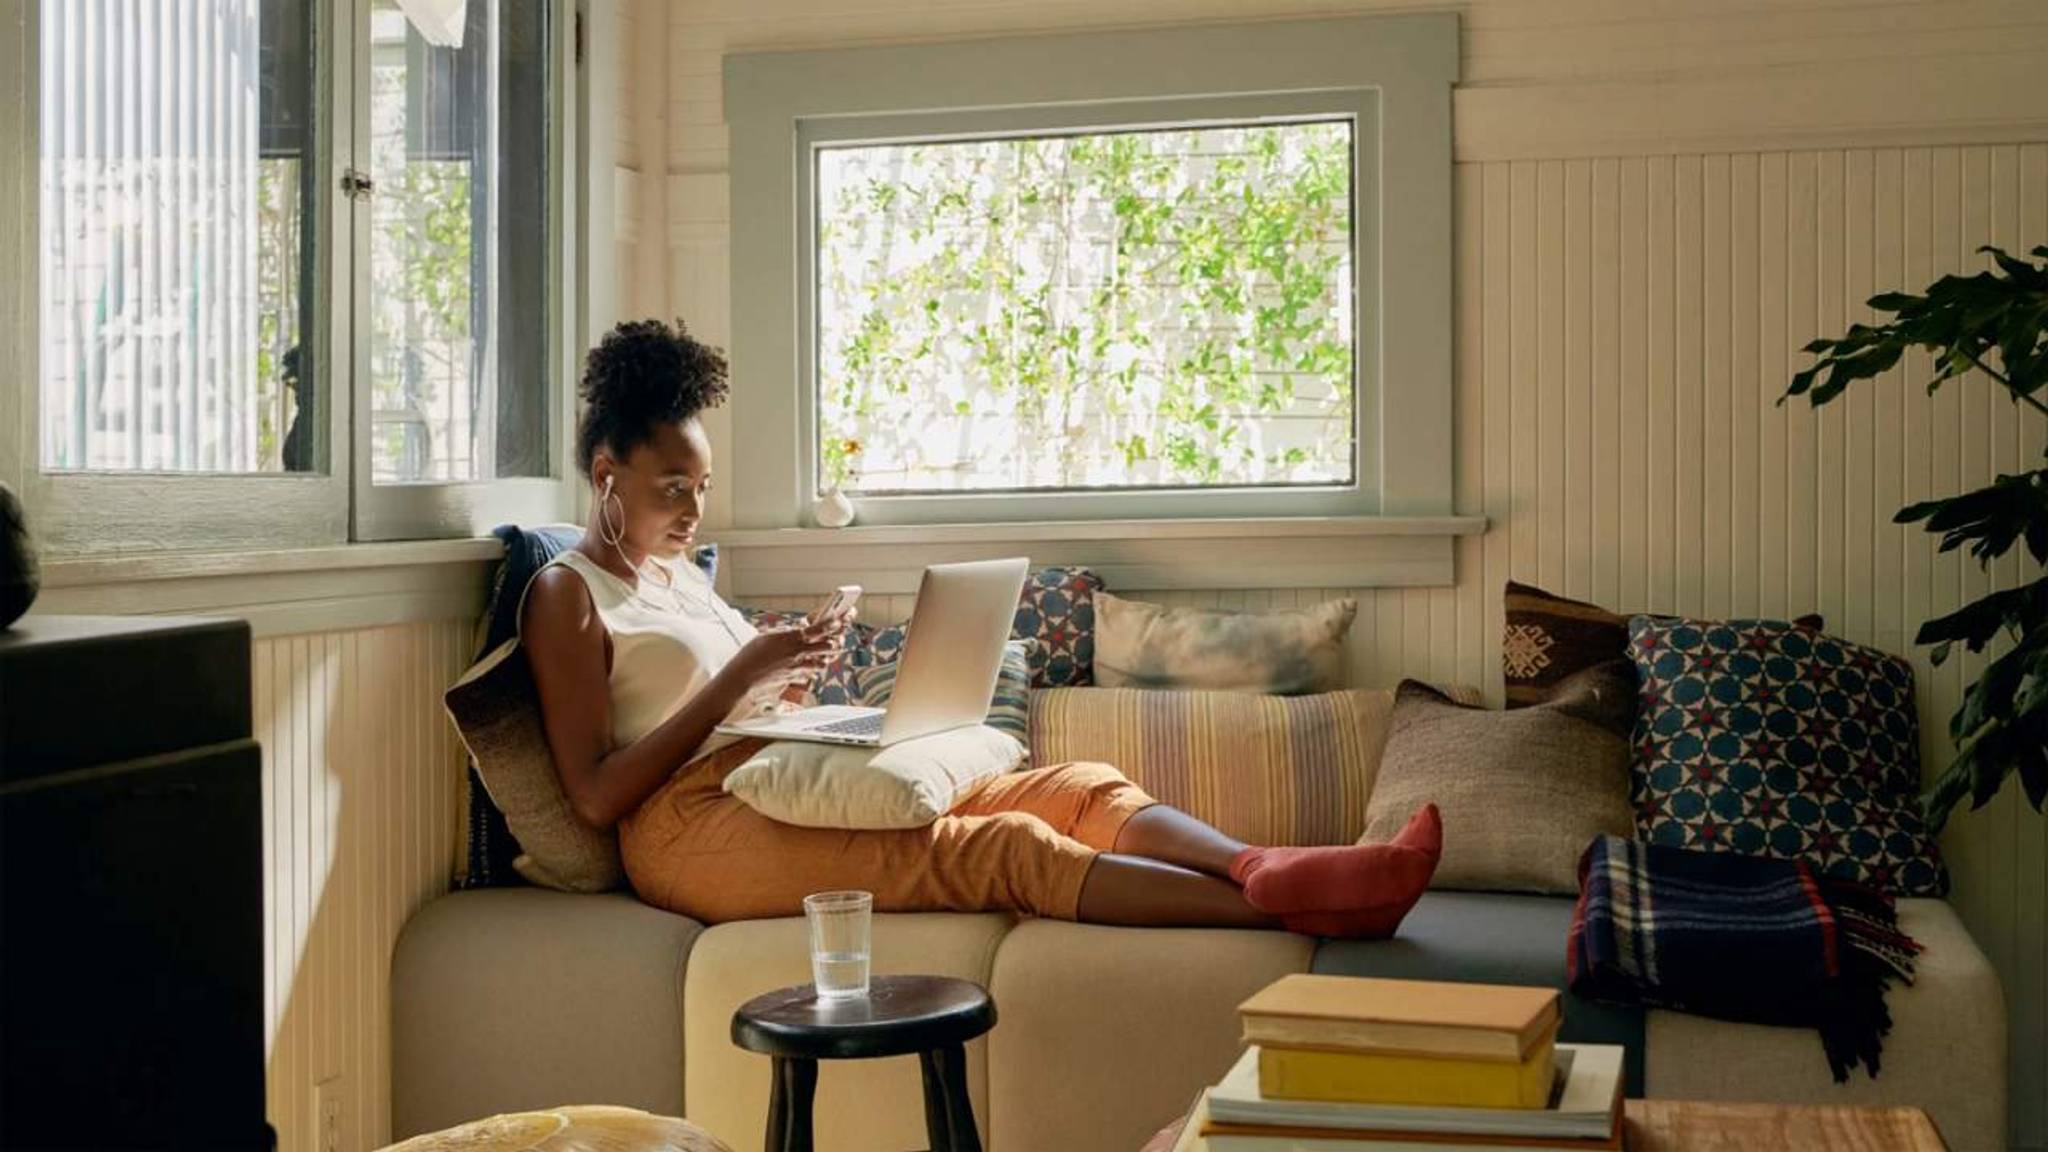 Airbnb’s Wi-Fi speed listing caters to remote workers